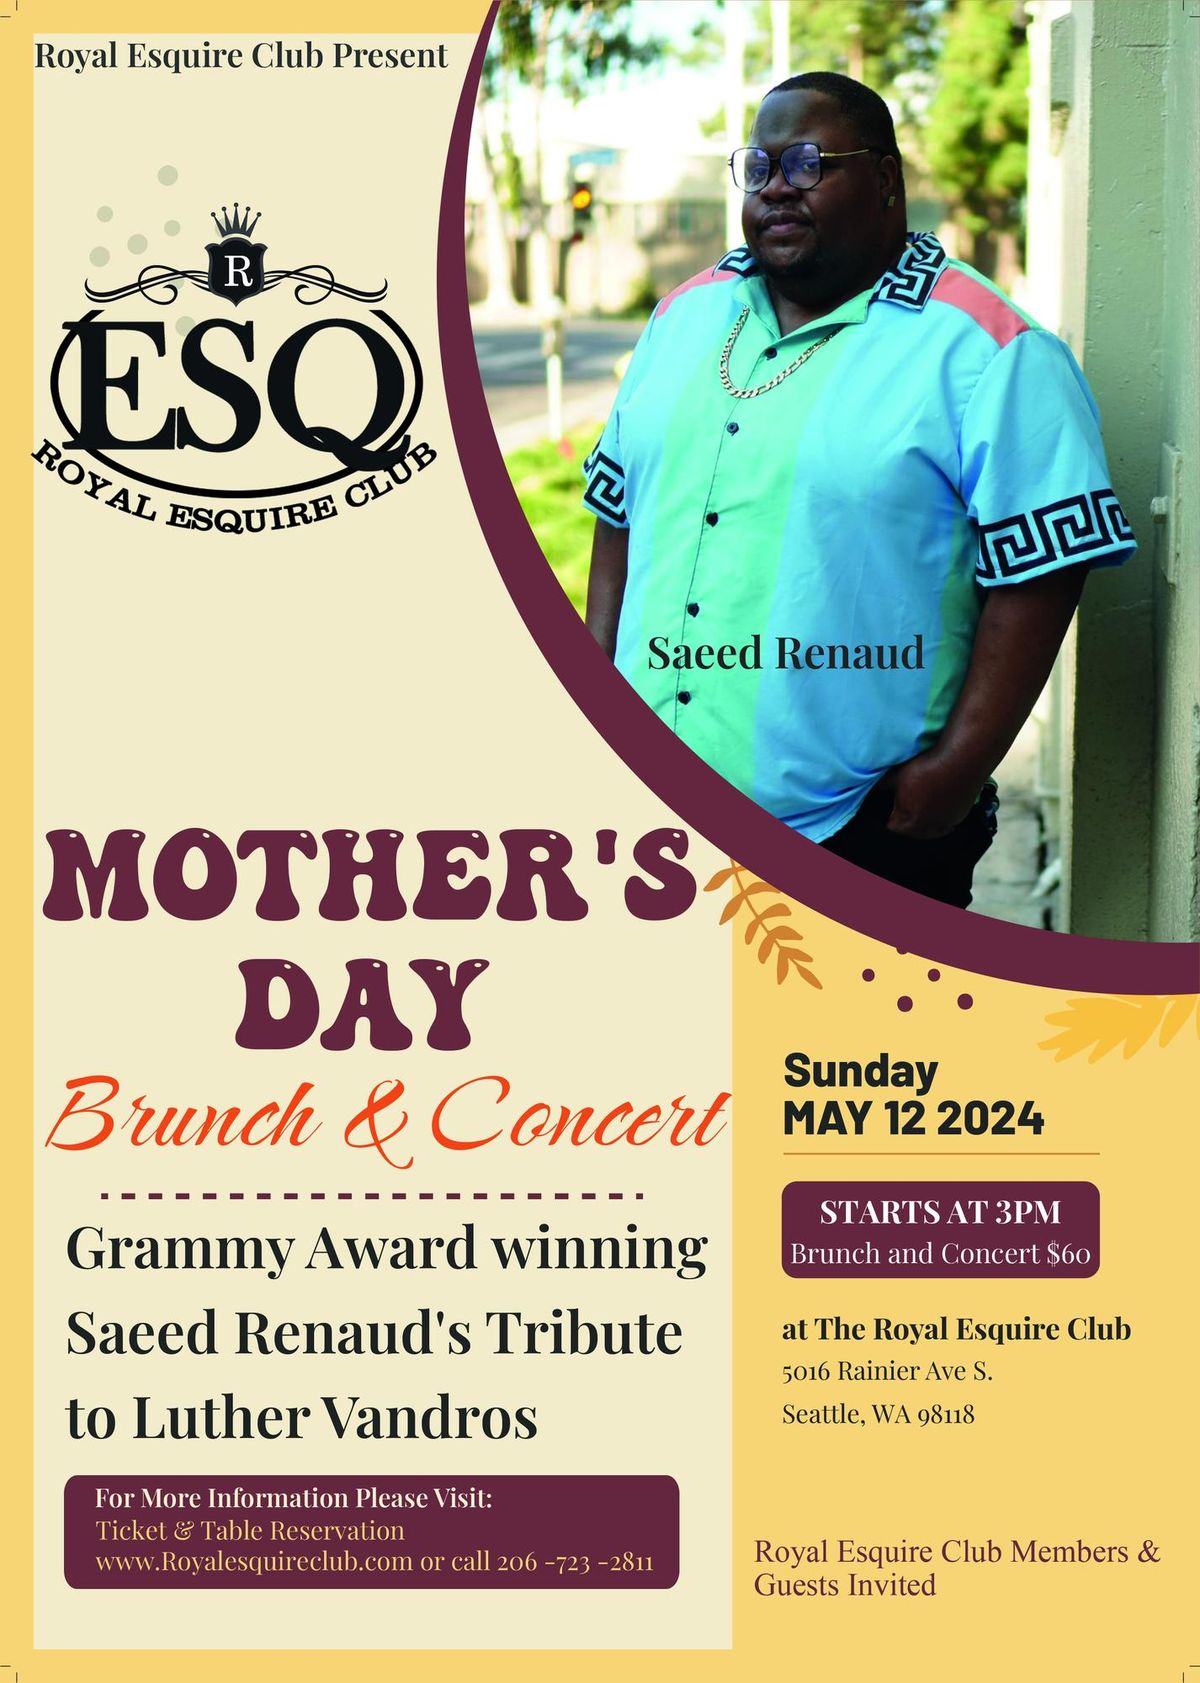 Royal Esquire Club Presents a Mother's Day Brunch and Concert Featuring Saeed Renaud